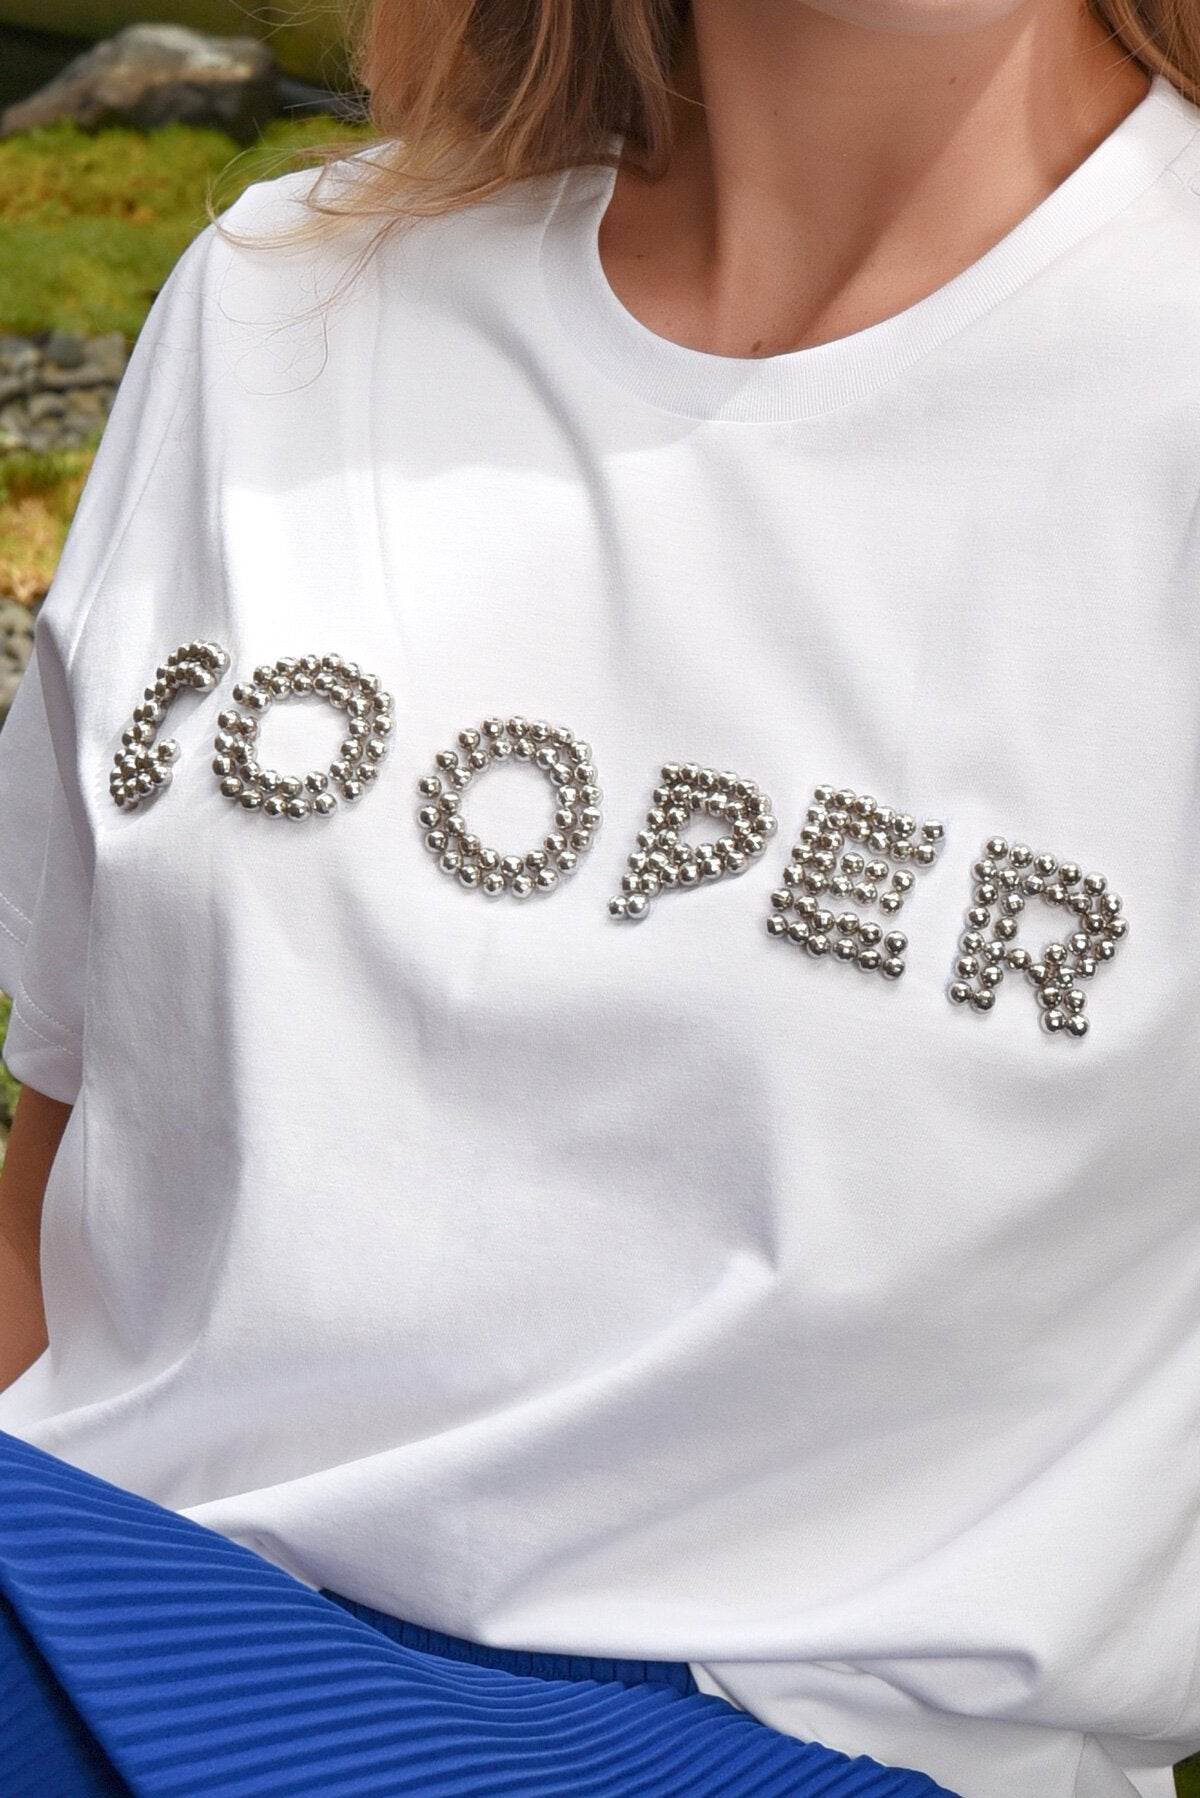 COOPER MY BEADING LADY T-SHIRT - WHITE - THE VOGUE STORE